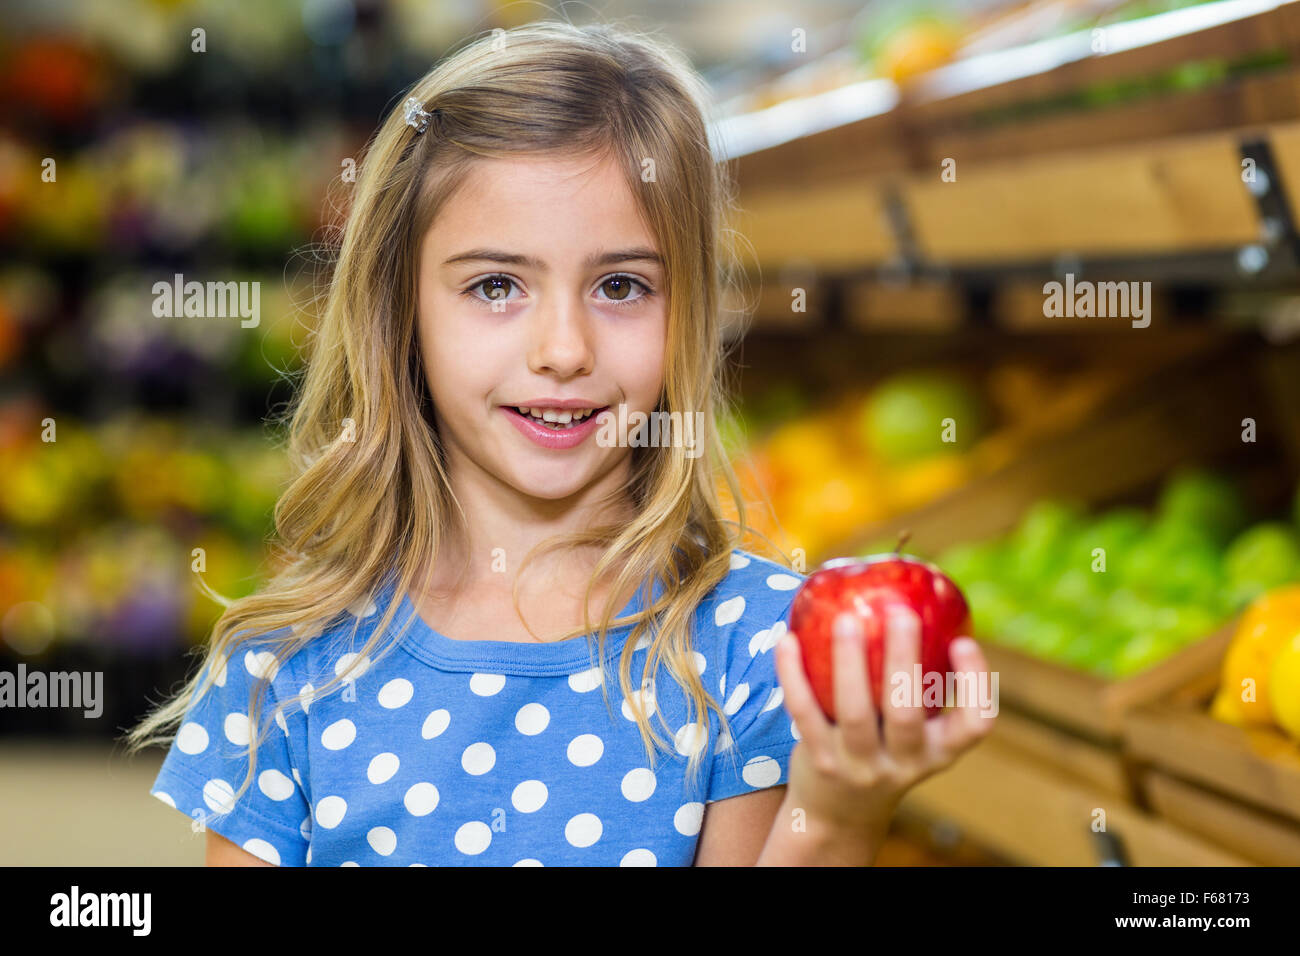 Cute girl holding an apple Banque D'Images